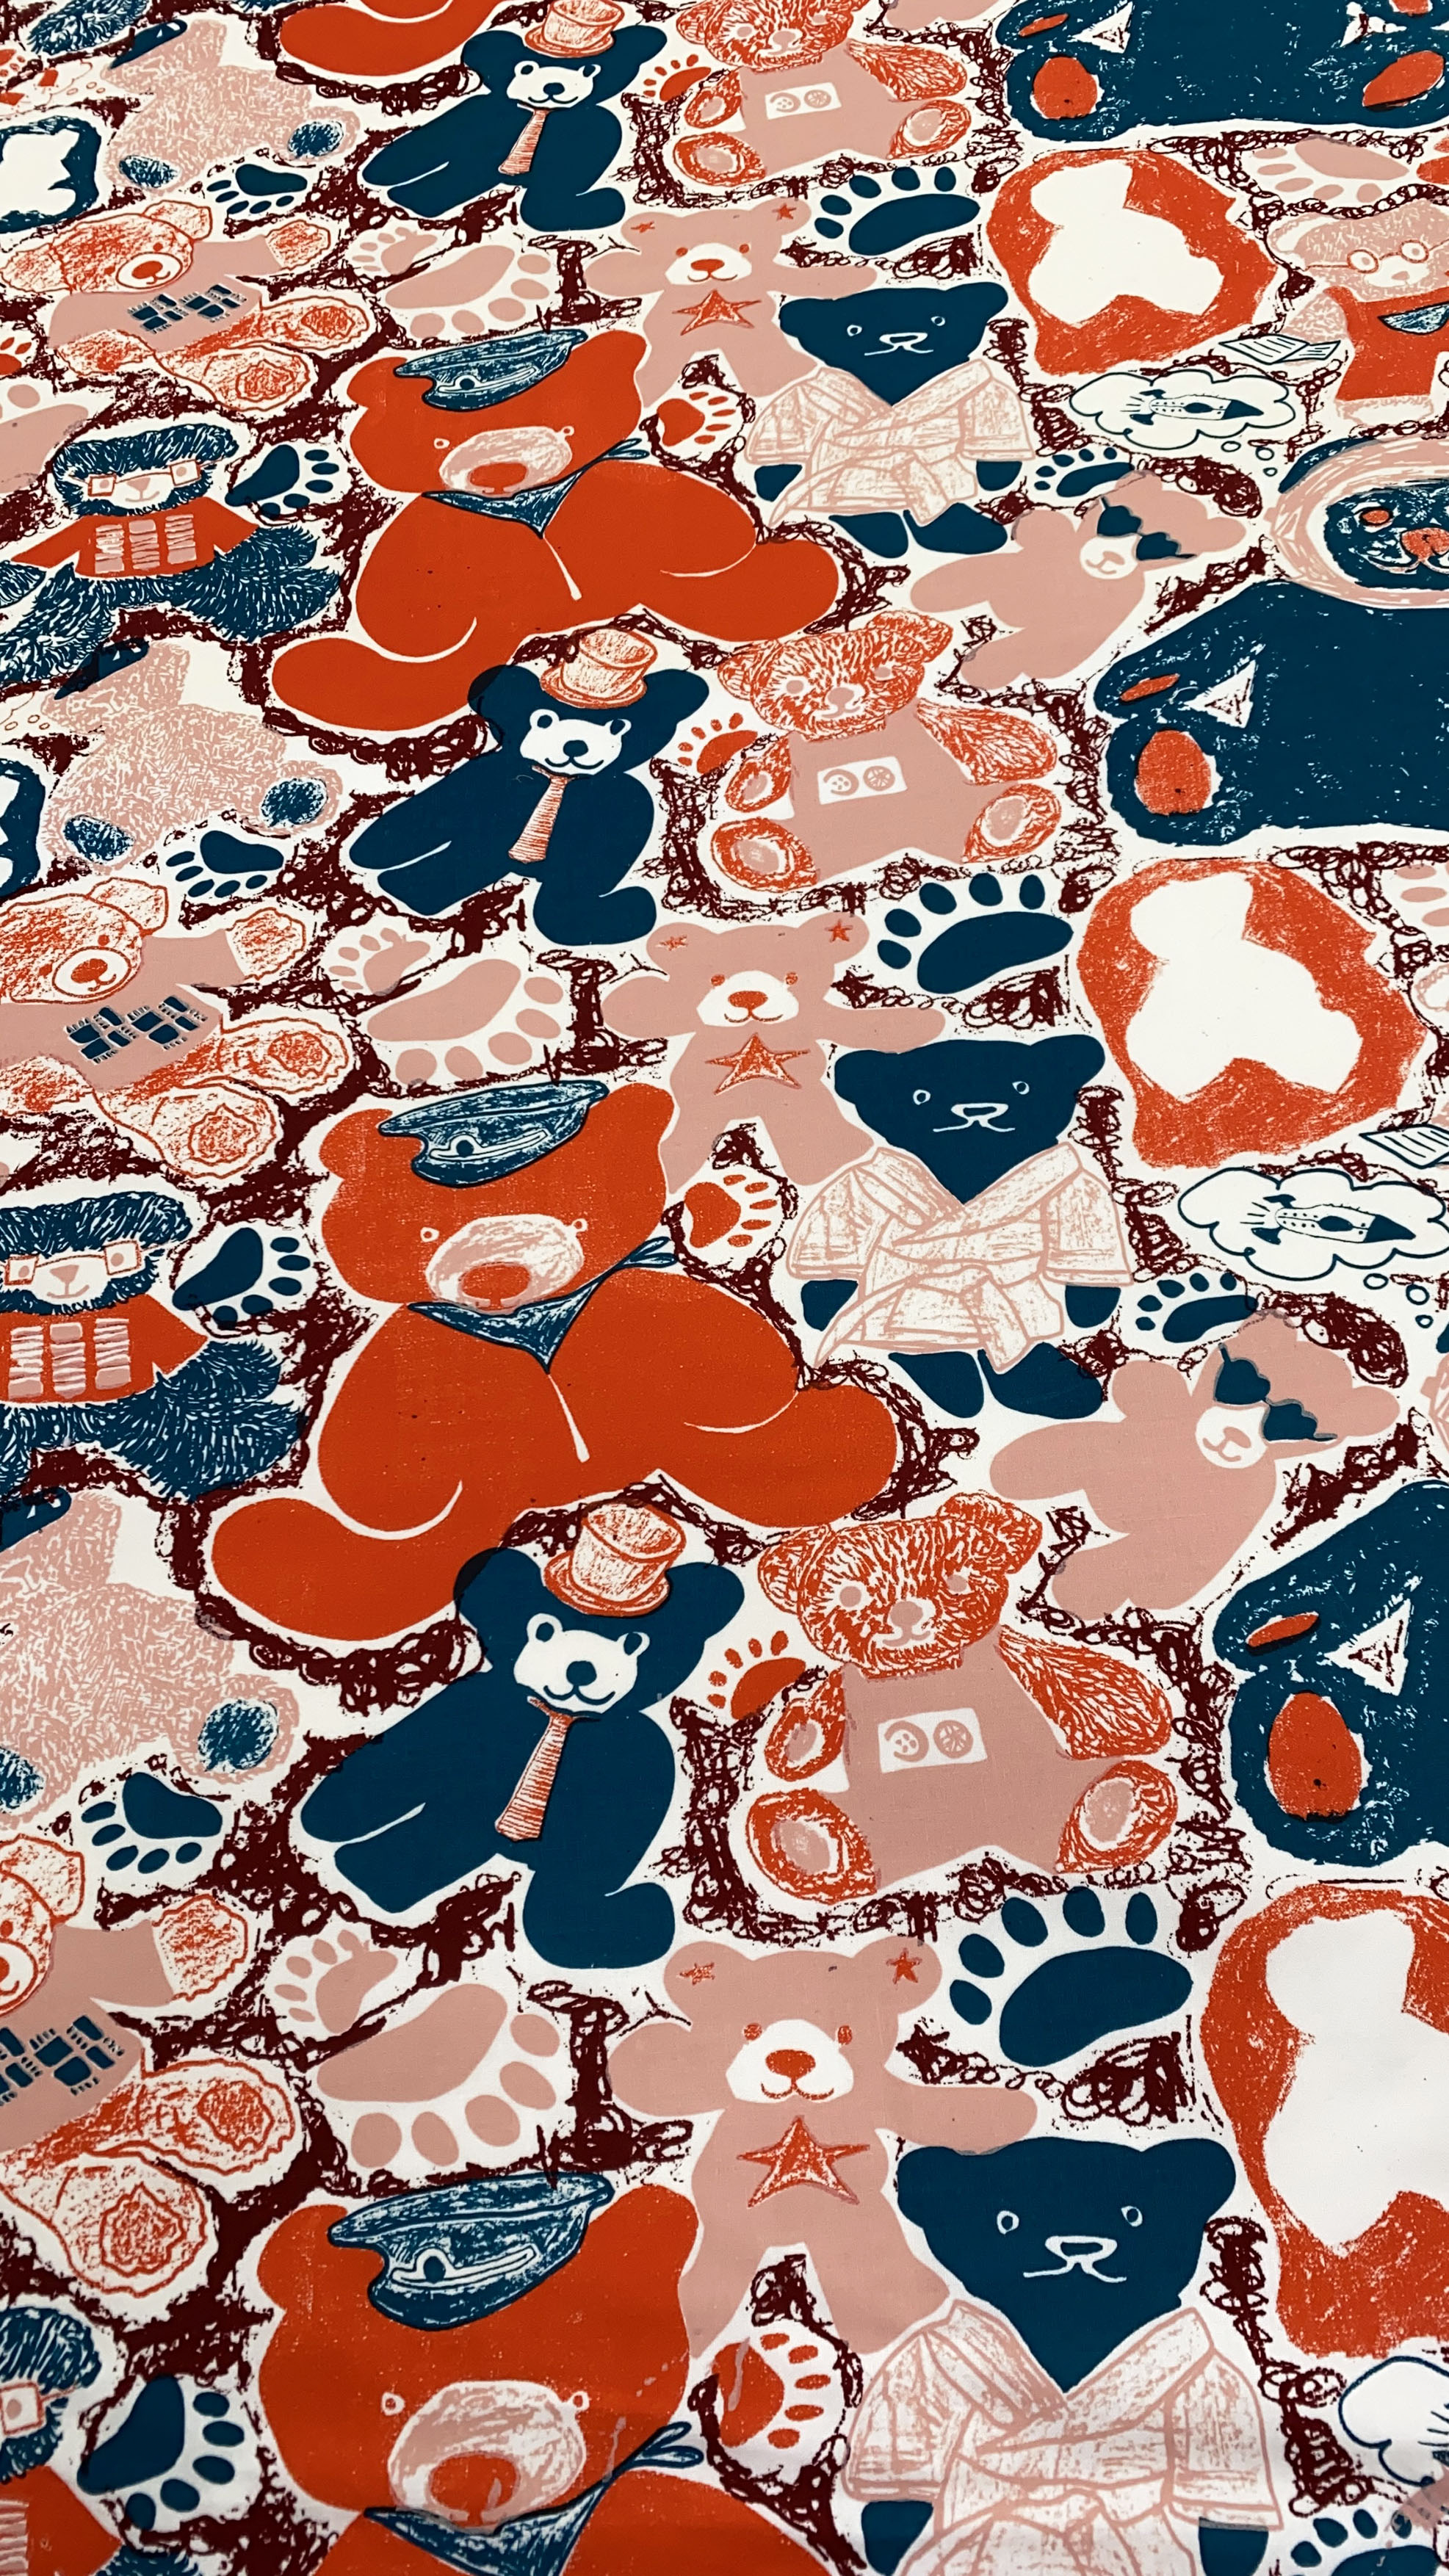 Final print design outcome by Emma Strudwick showing a colourful screen-printed pattern in a full-drop repeat.